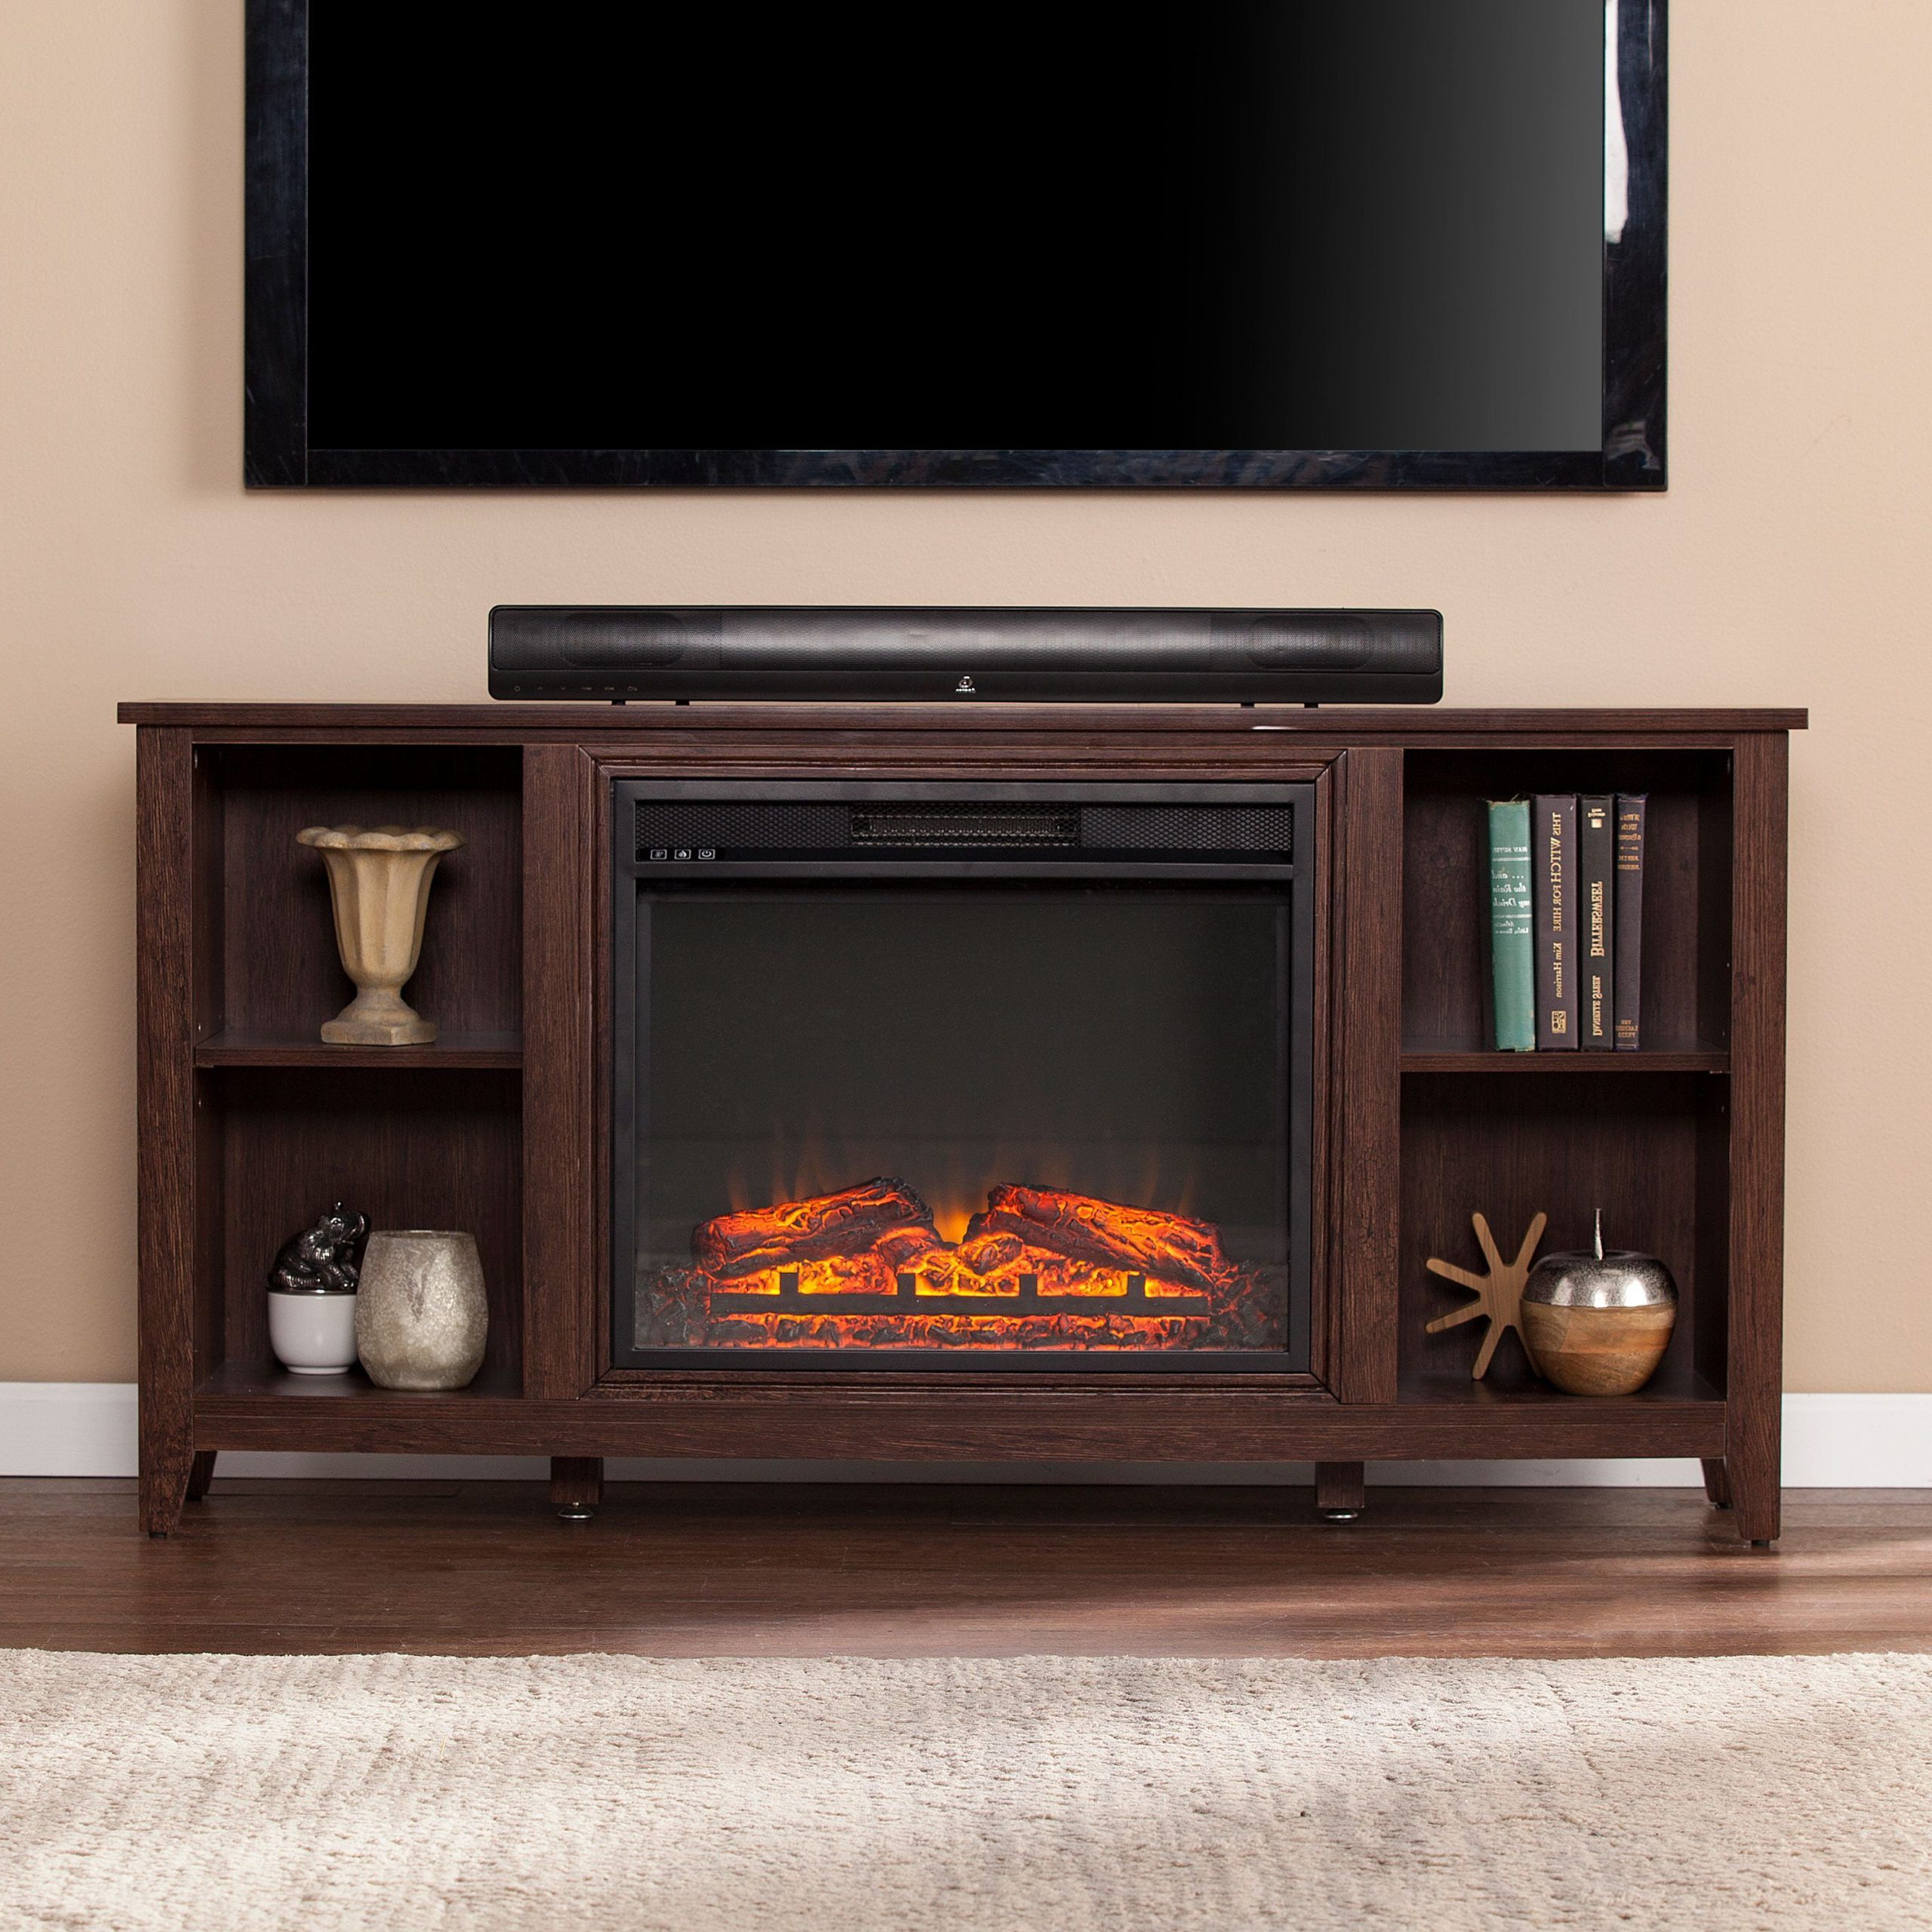 Paxifyre Electric Fireplace Tv Stand, For Tvs Up To 50", Espresso For Newest Electric Fireplace Tv Stands (View 10 of 15)